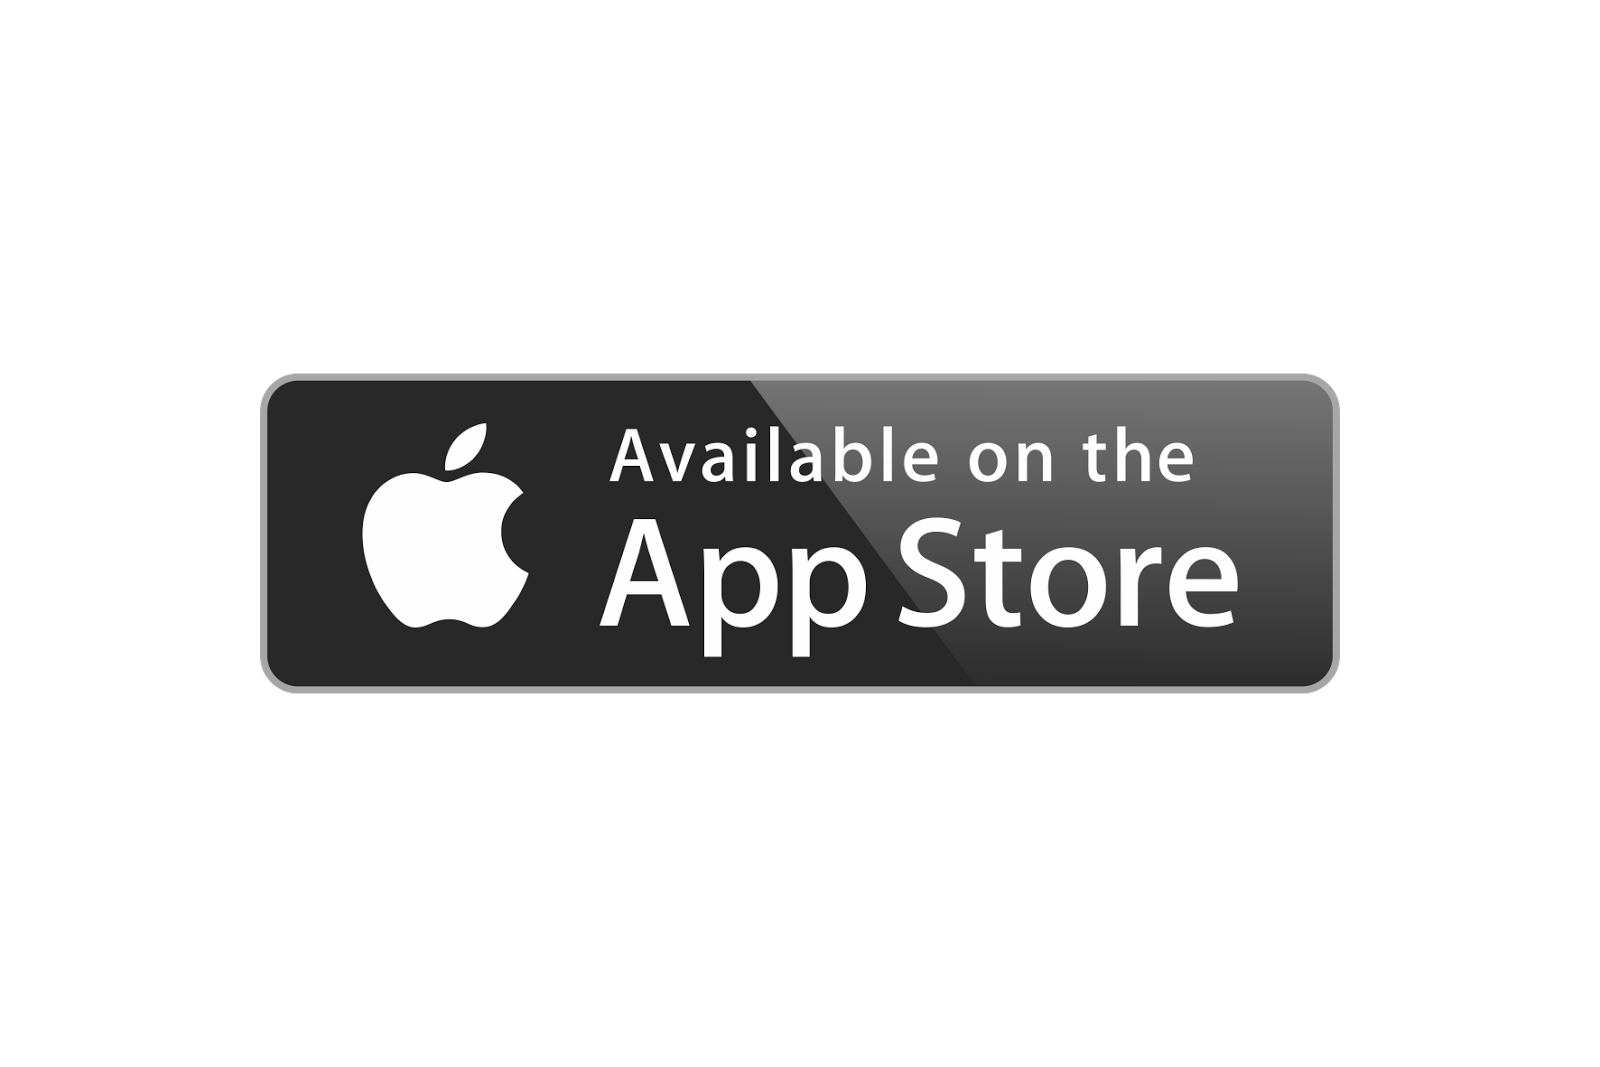 Available on the App Store Logo